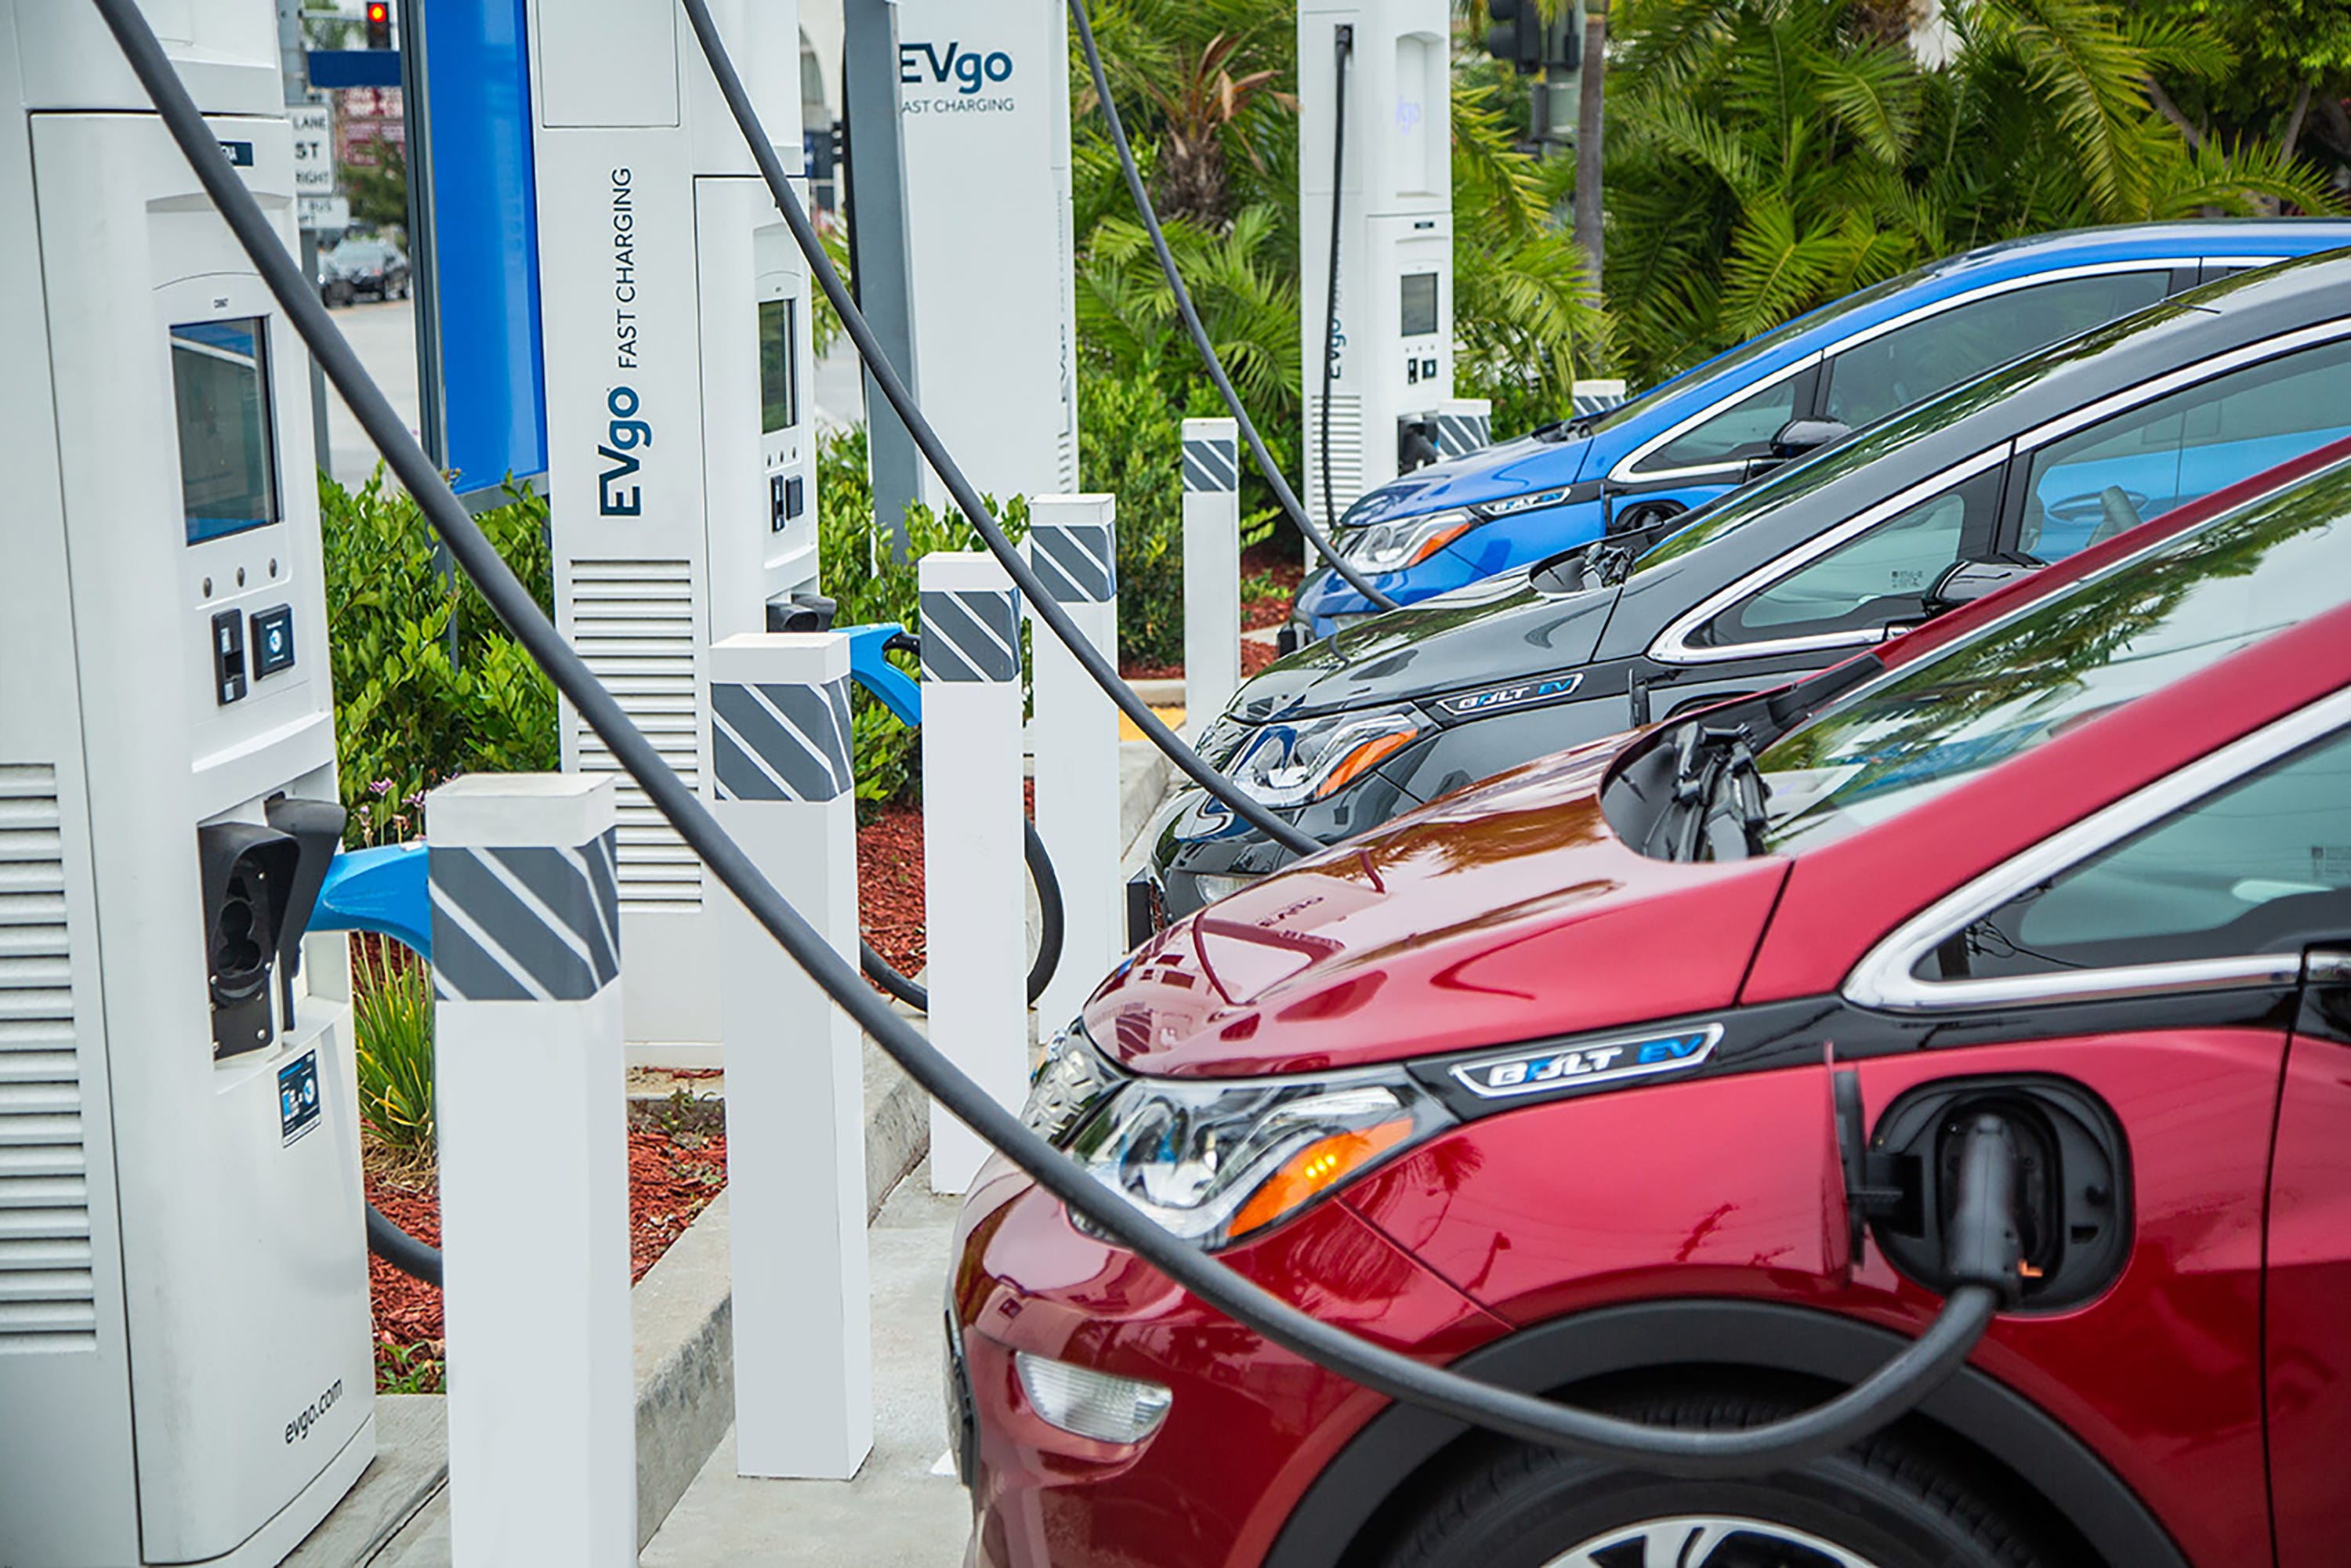  A row of electric vehicles are plugged in and charging at a public charging station.